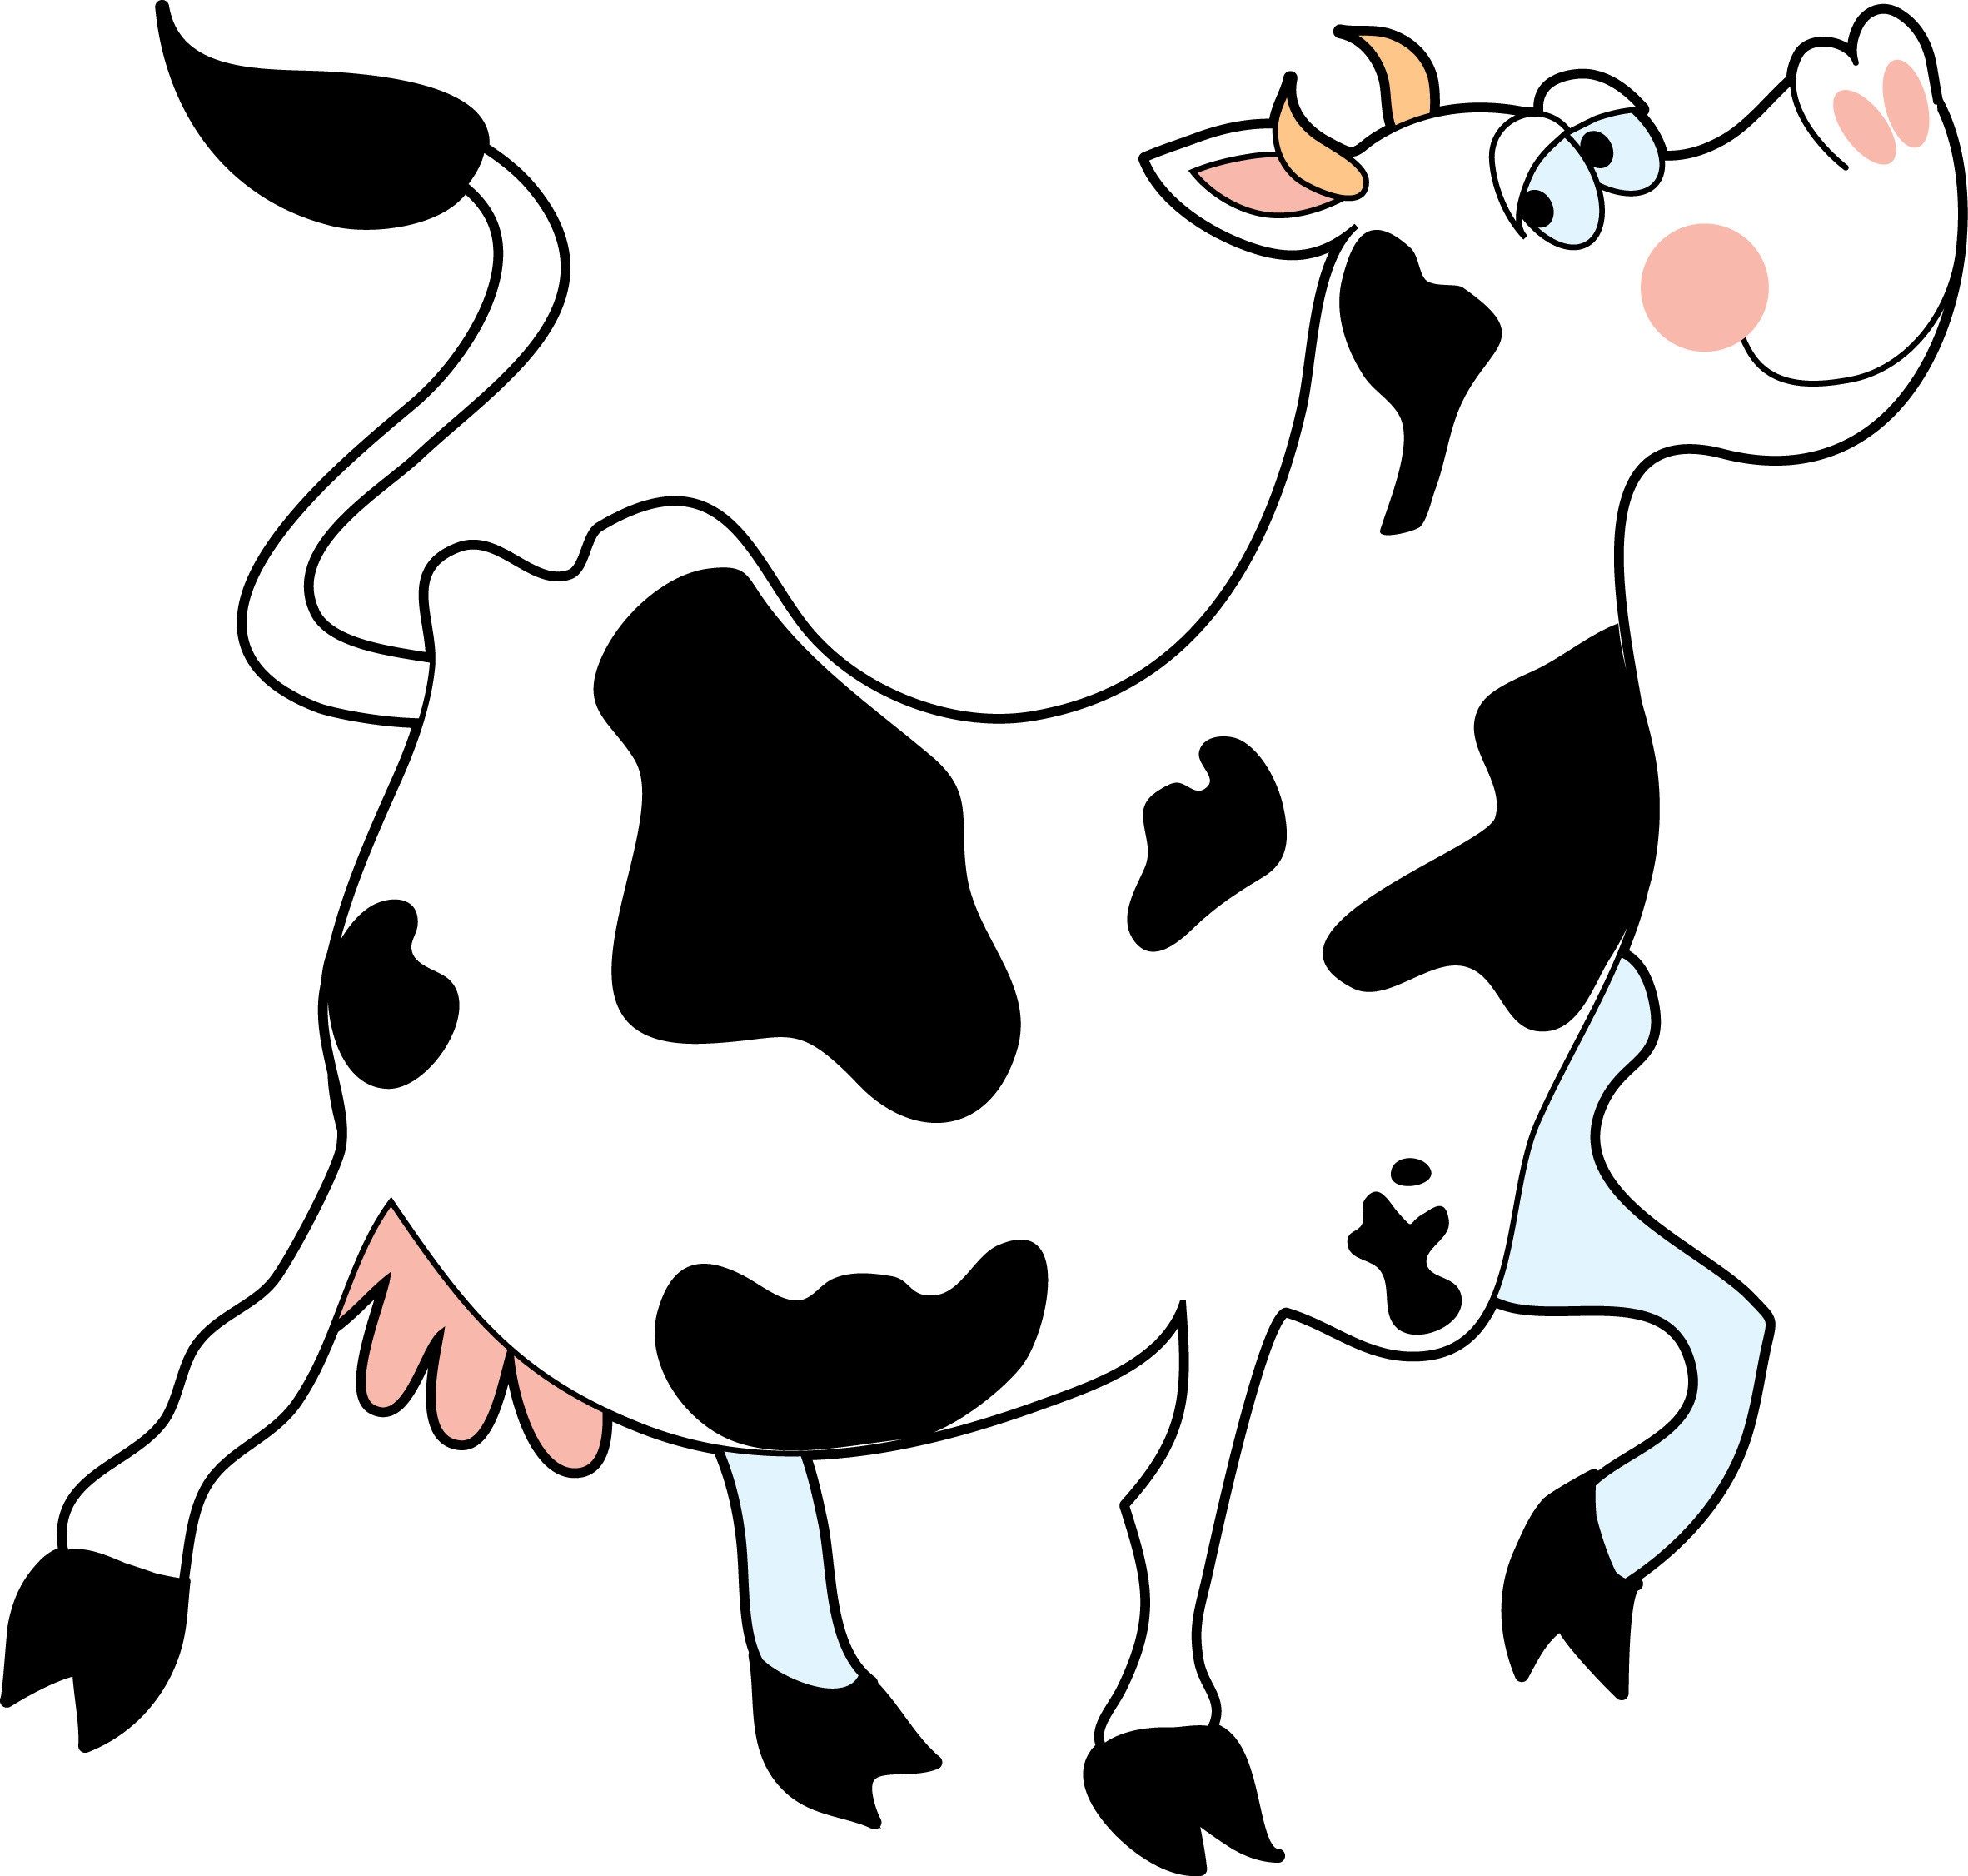 Cow Free Black And White Panda clipart free image.